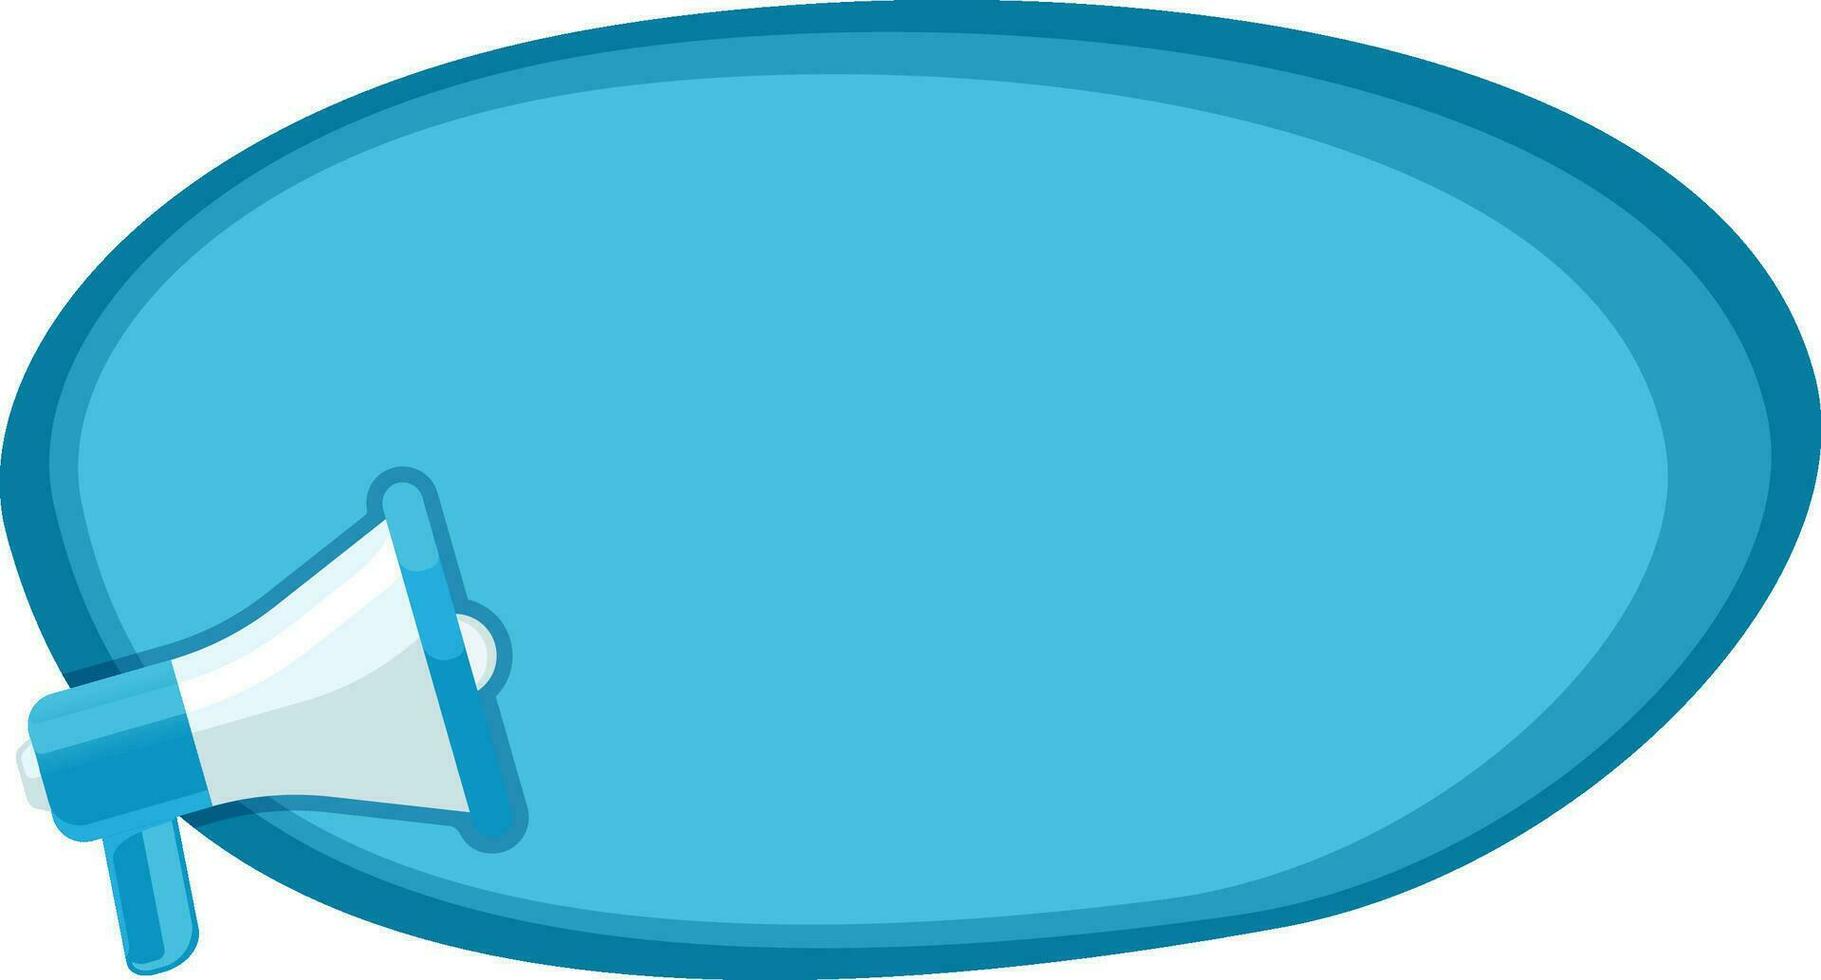 media banner with blue megaphone and a bubble talk vector